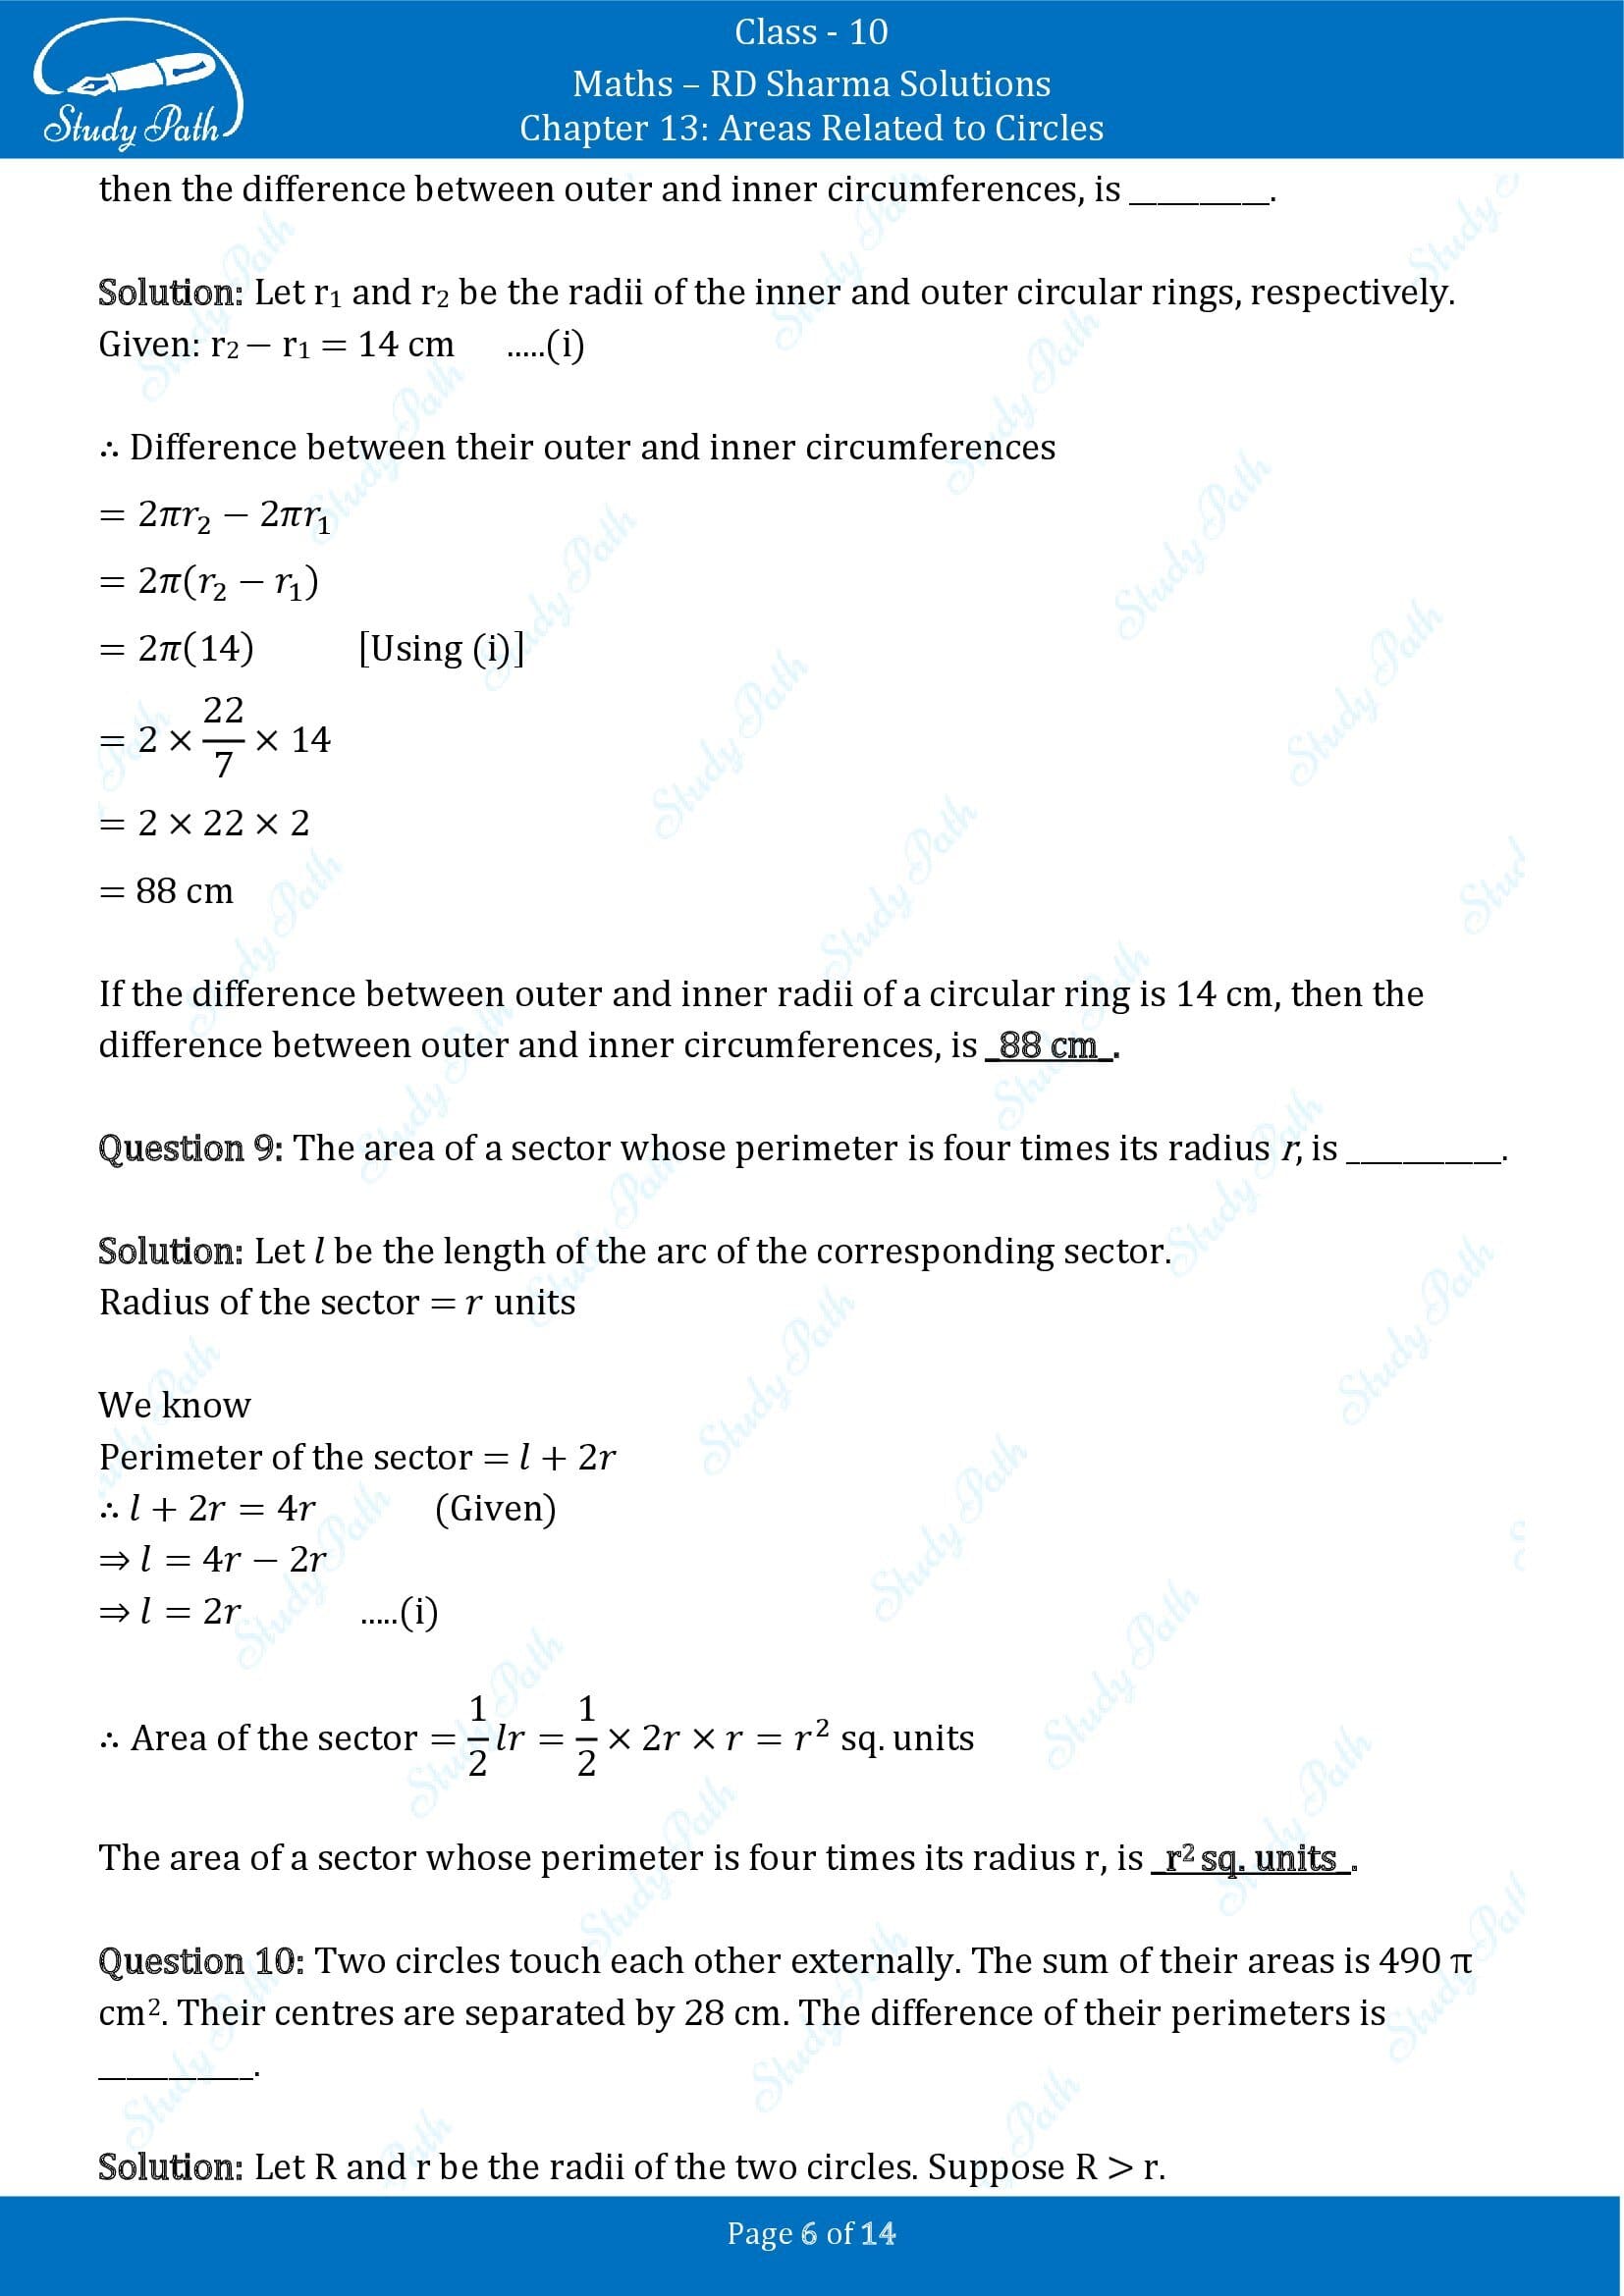 RD Sharma Solutions Class 10 Chapter 13 Areas Related to Circles Fill in the Blank Type Questions FBQs 00006